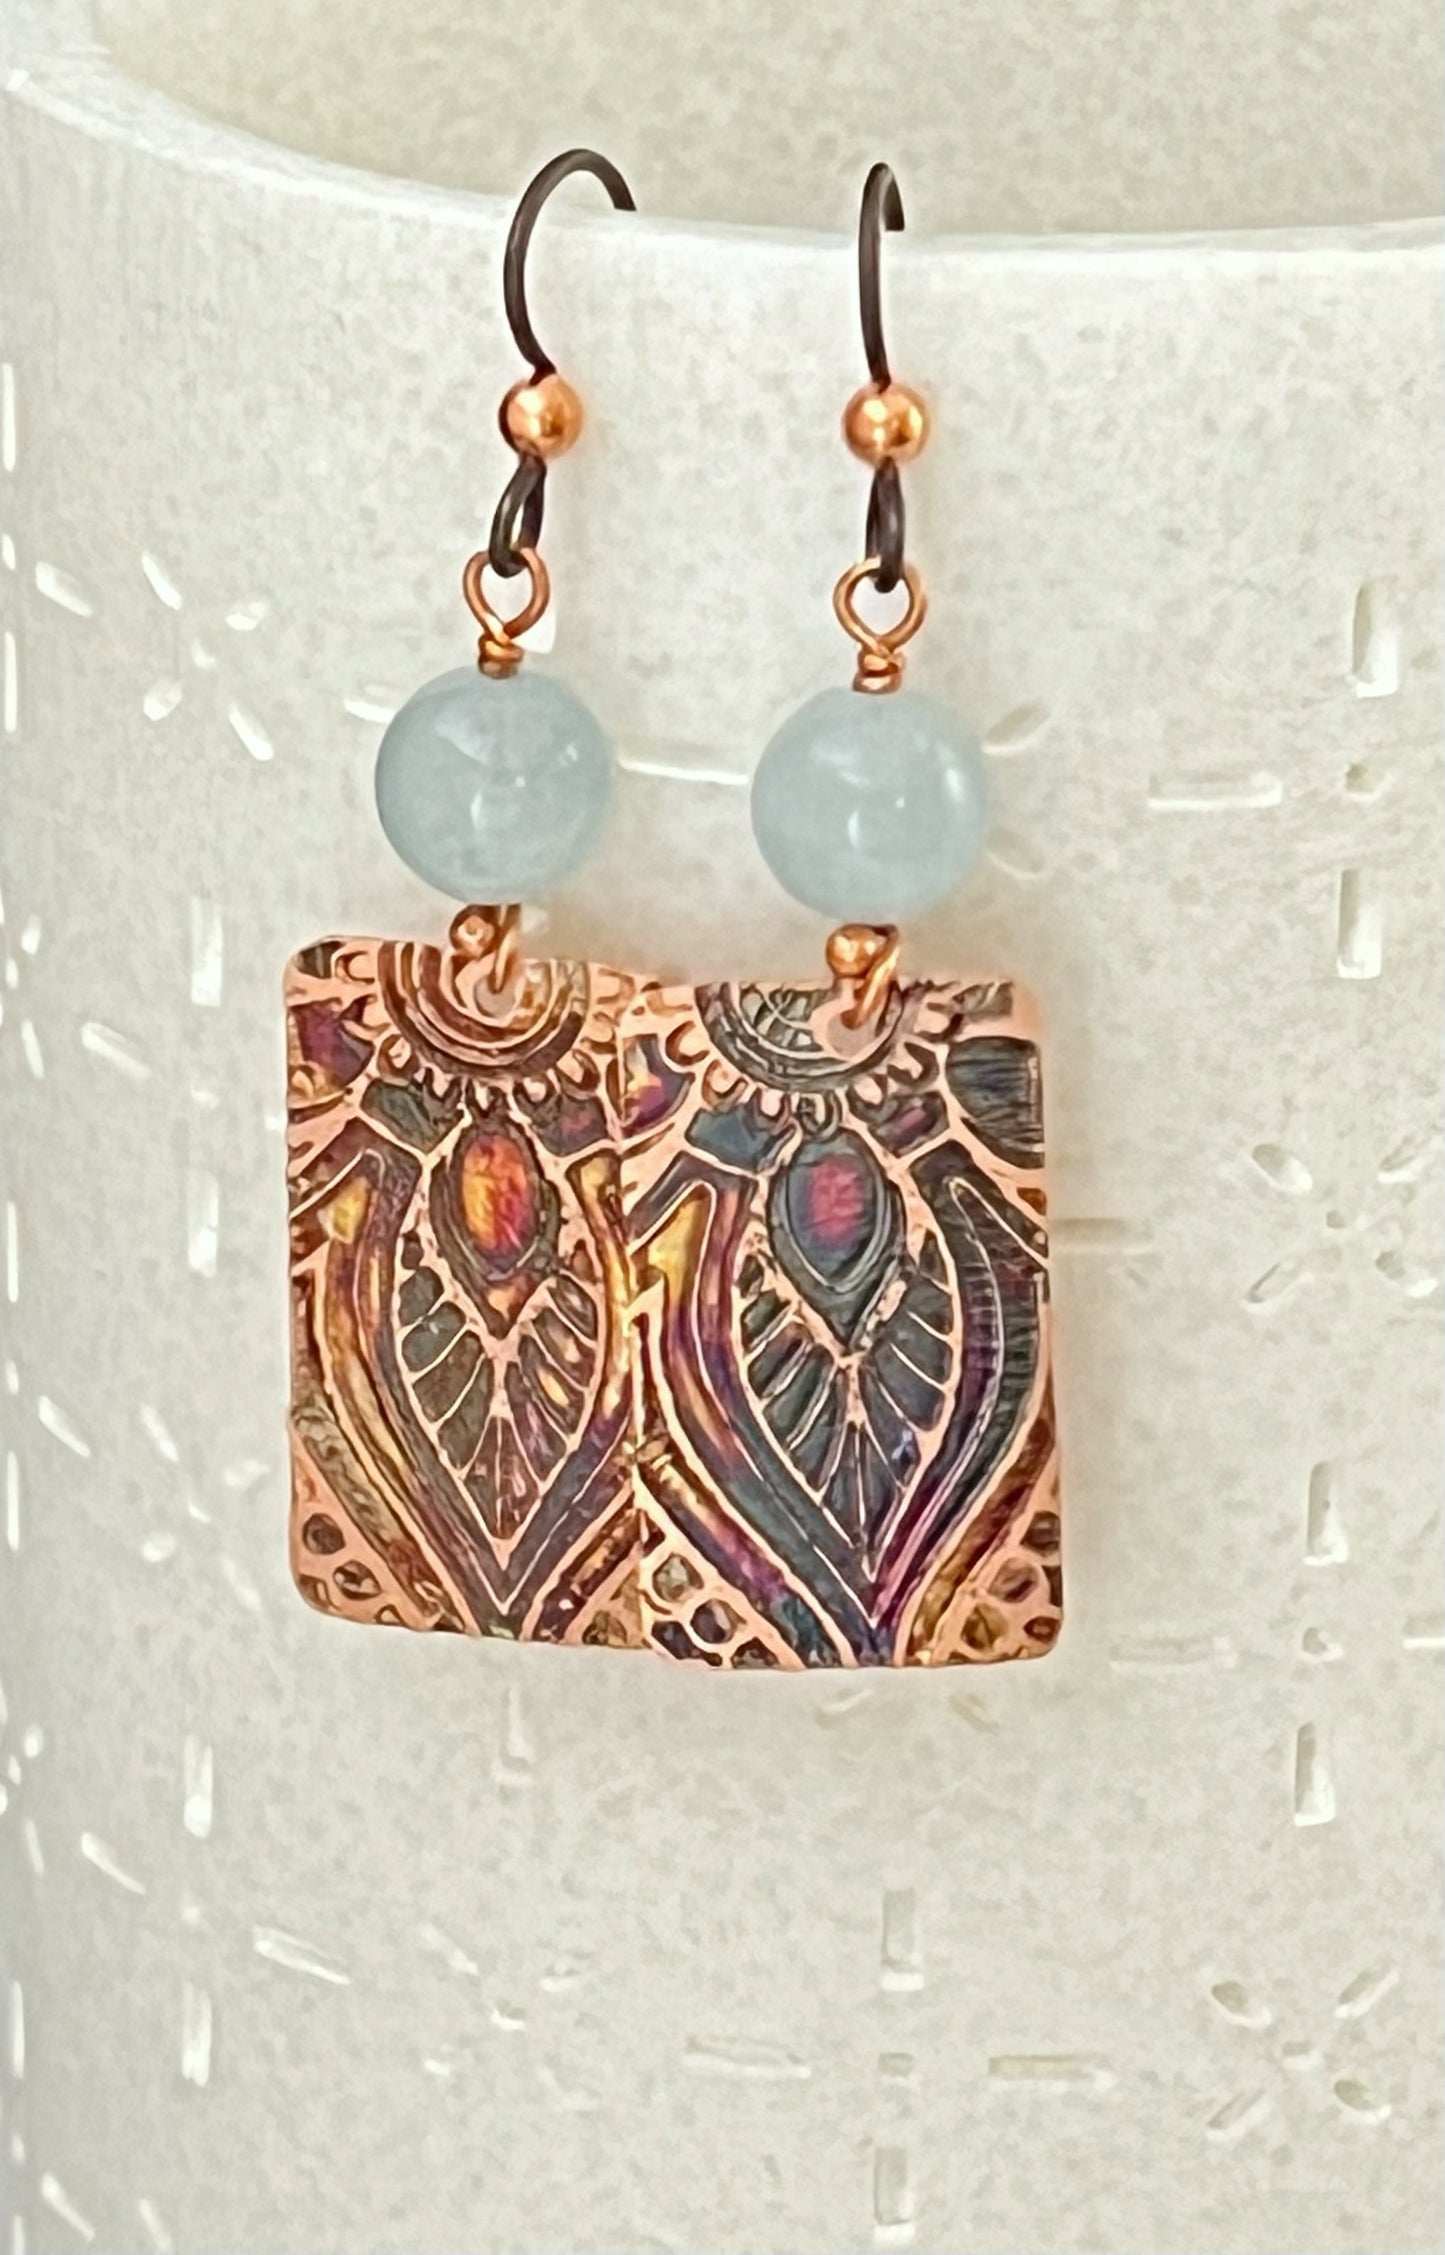 Acid etched copper earrings with aquamarine gemstones